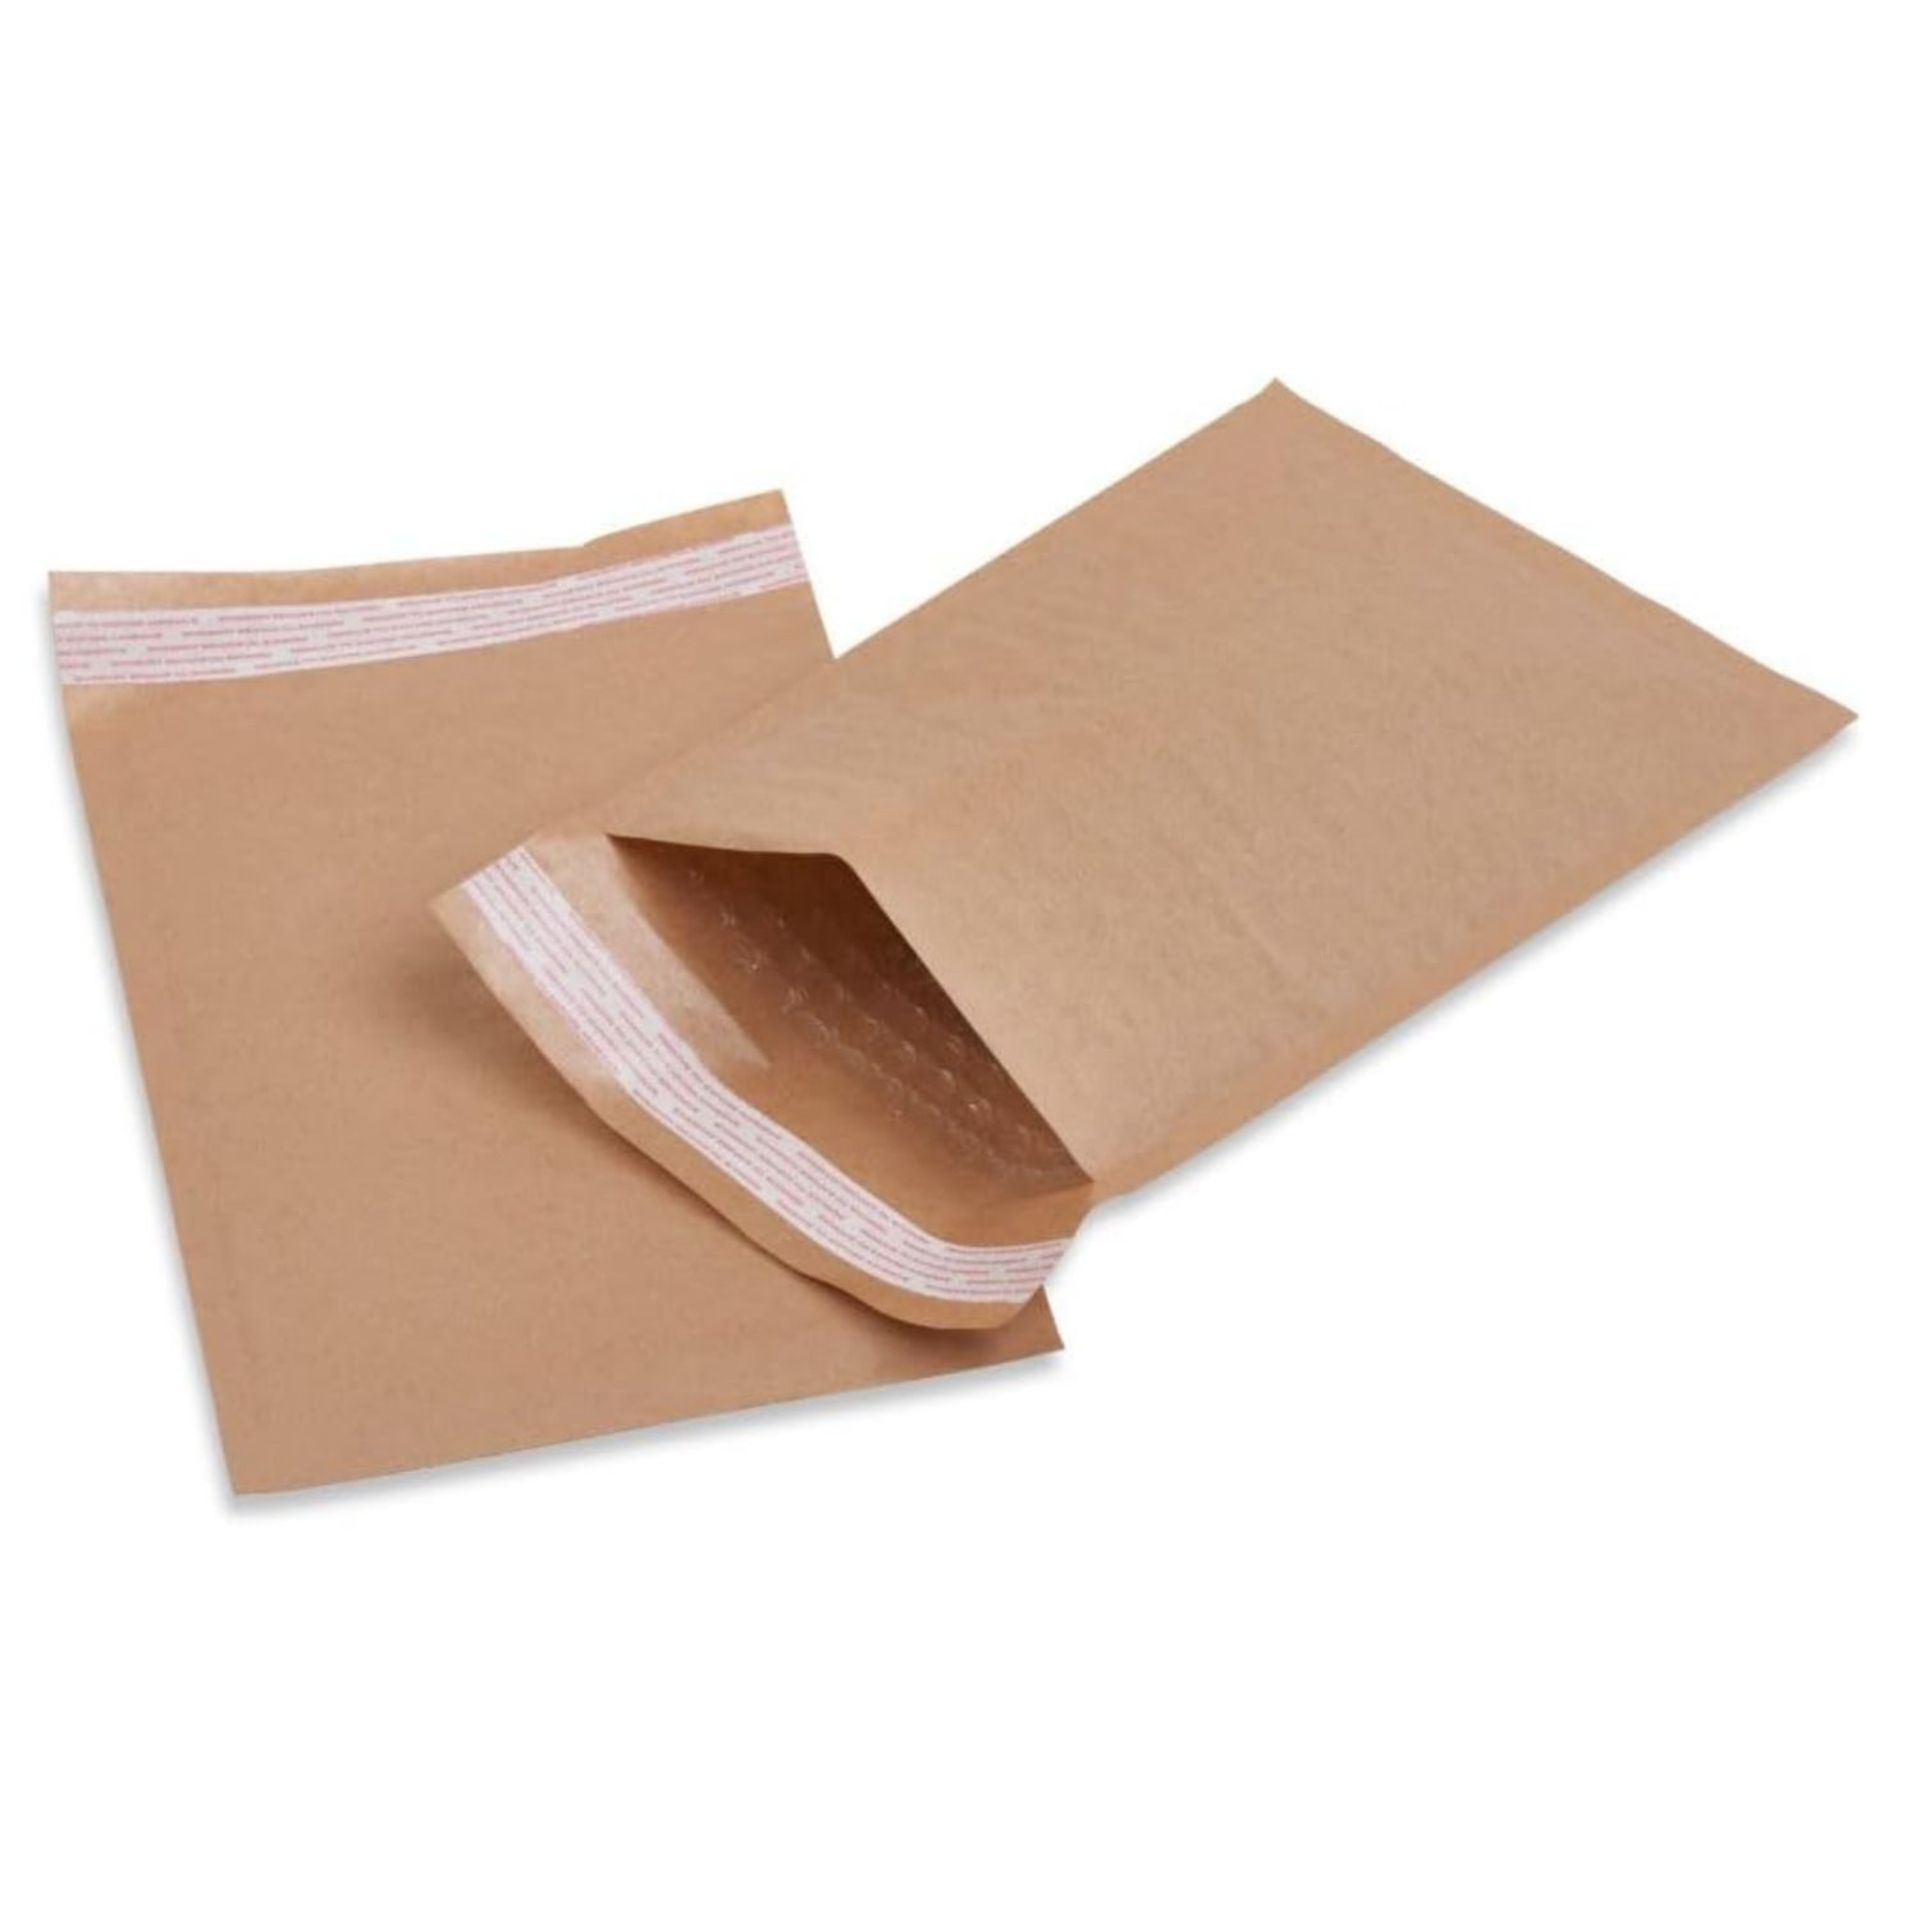 10 BOXES OF PAPER BAG ENVELOPES BUBBLE BAGS 100 PACK PEEL AND SEAL TOUGH LIGHT PADDED (170 X 210MM) - Image 3 of 4